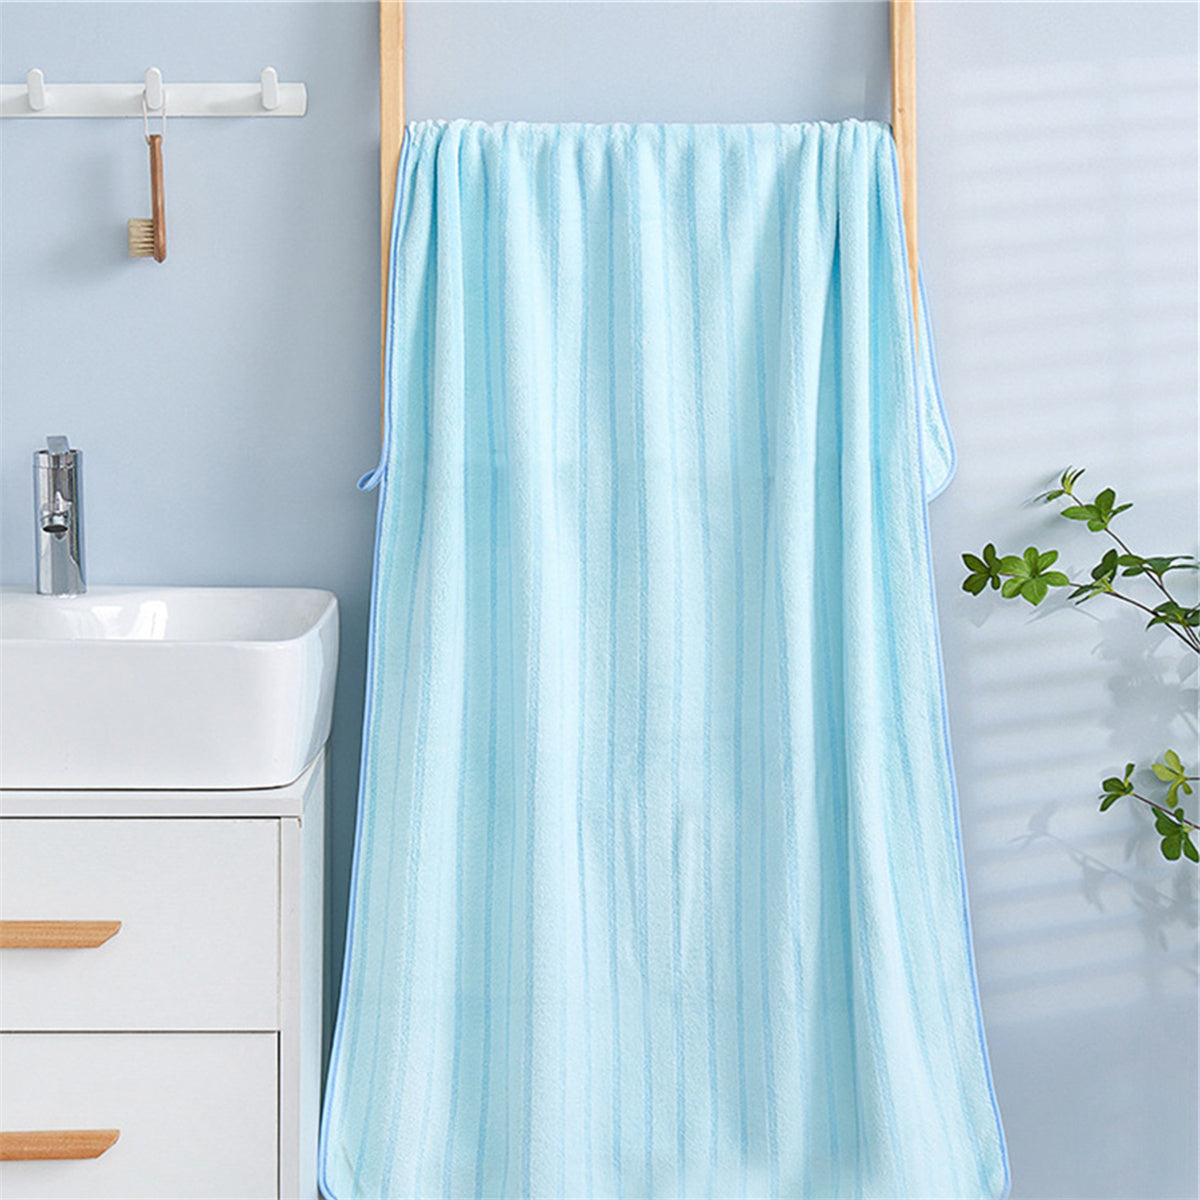 Soft and Absorbent TOWEL BATH TOWEL Wholesale